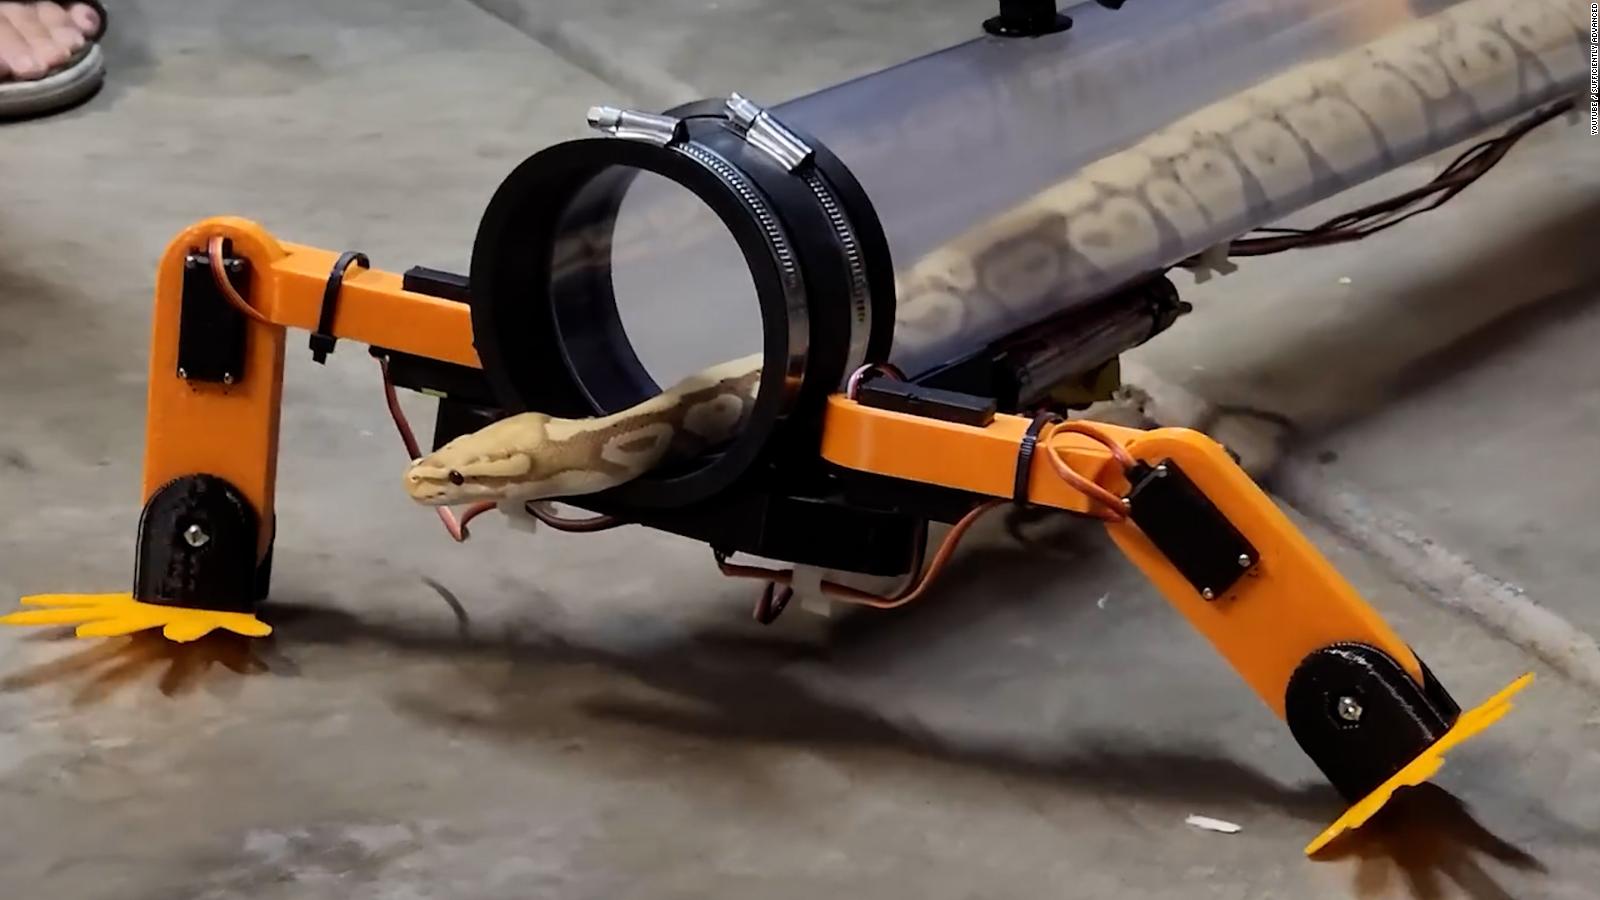 Video: r gives a snake robotic legs to help it walk - CNN Video